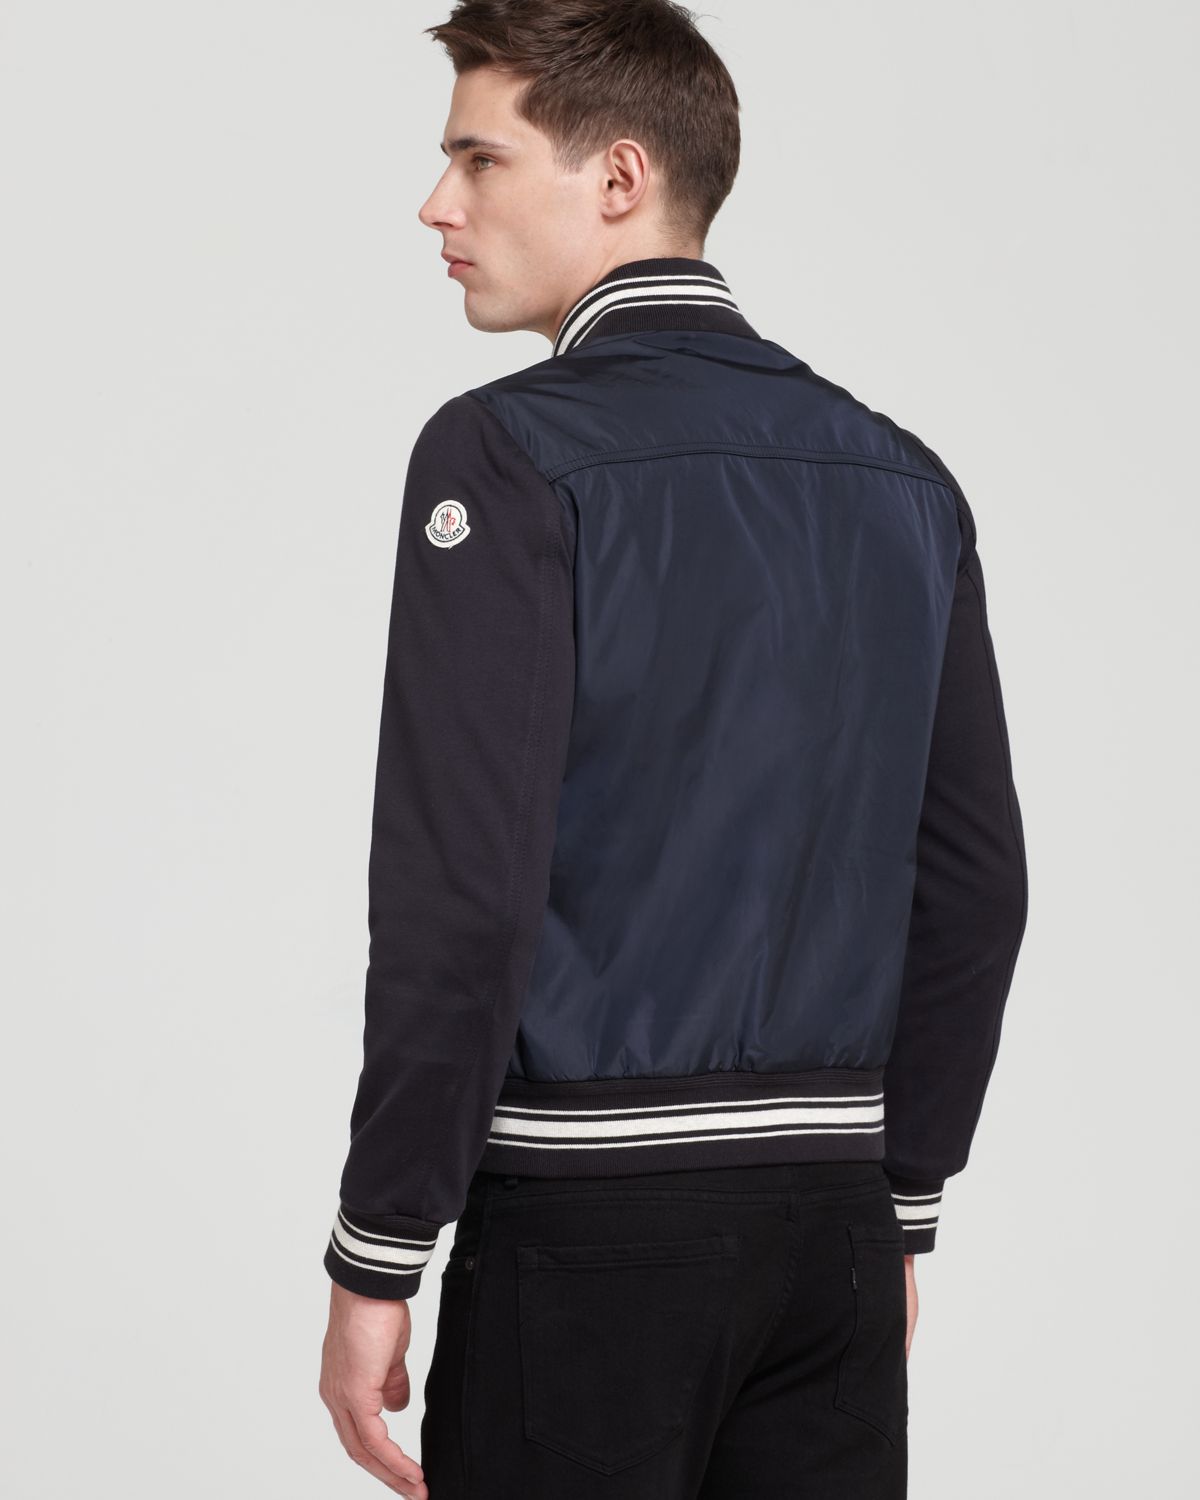 Moncler Clement Baseball Jacket in Navy 